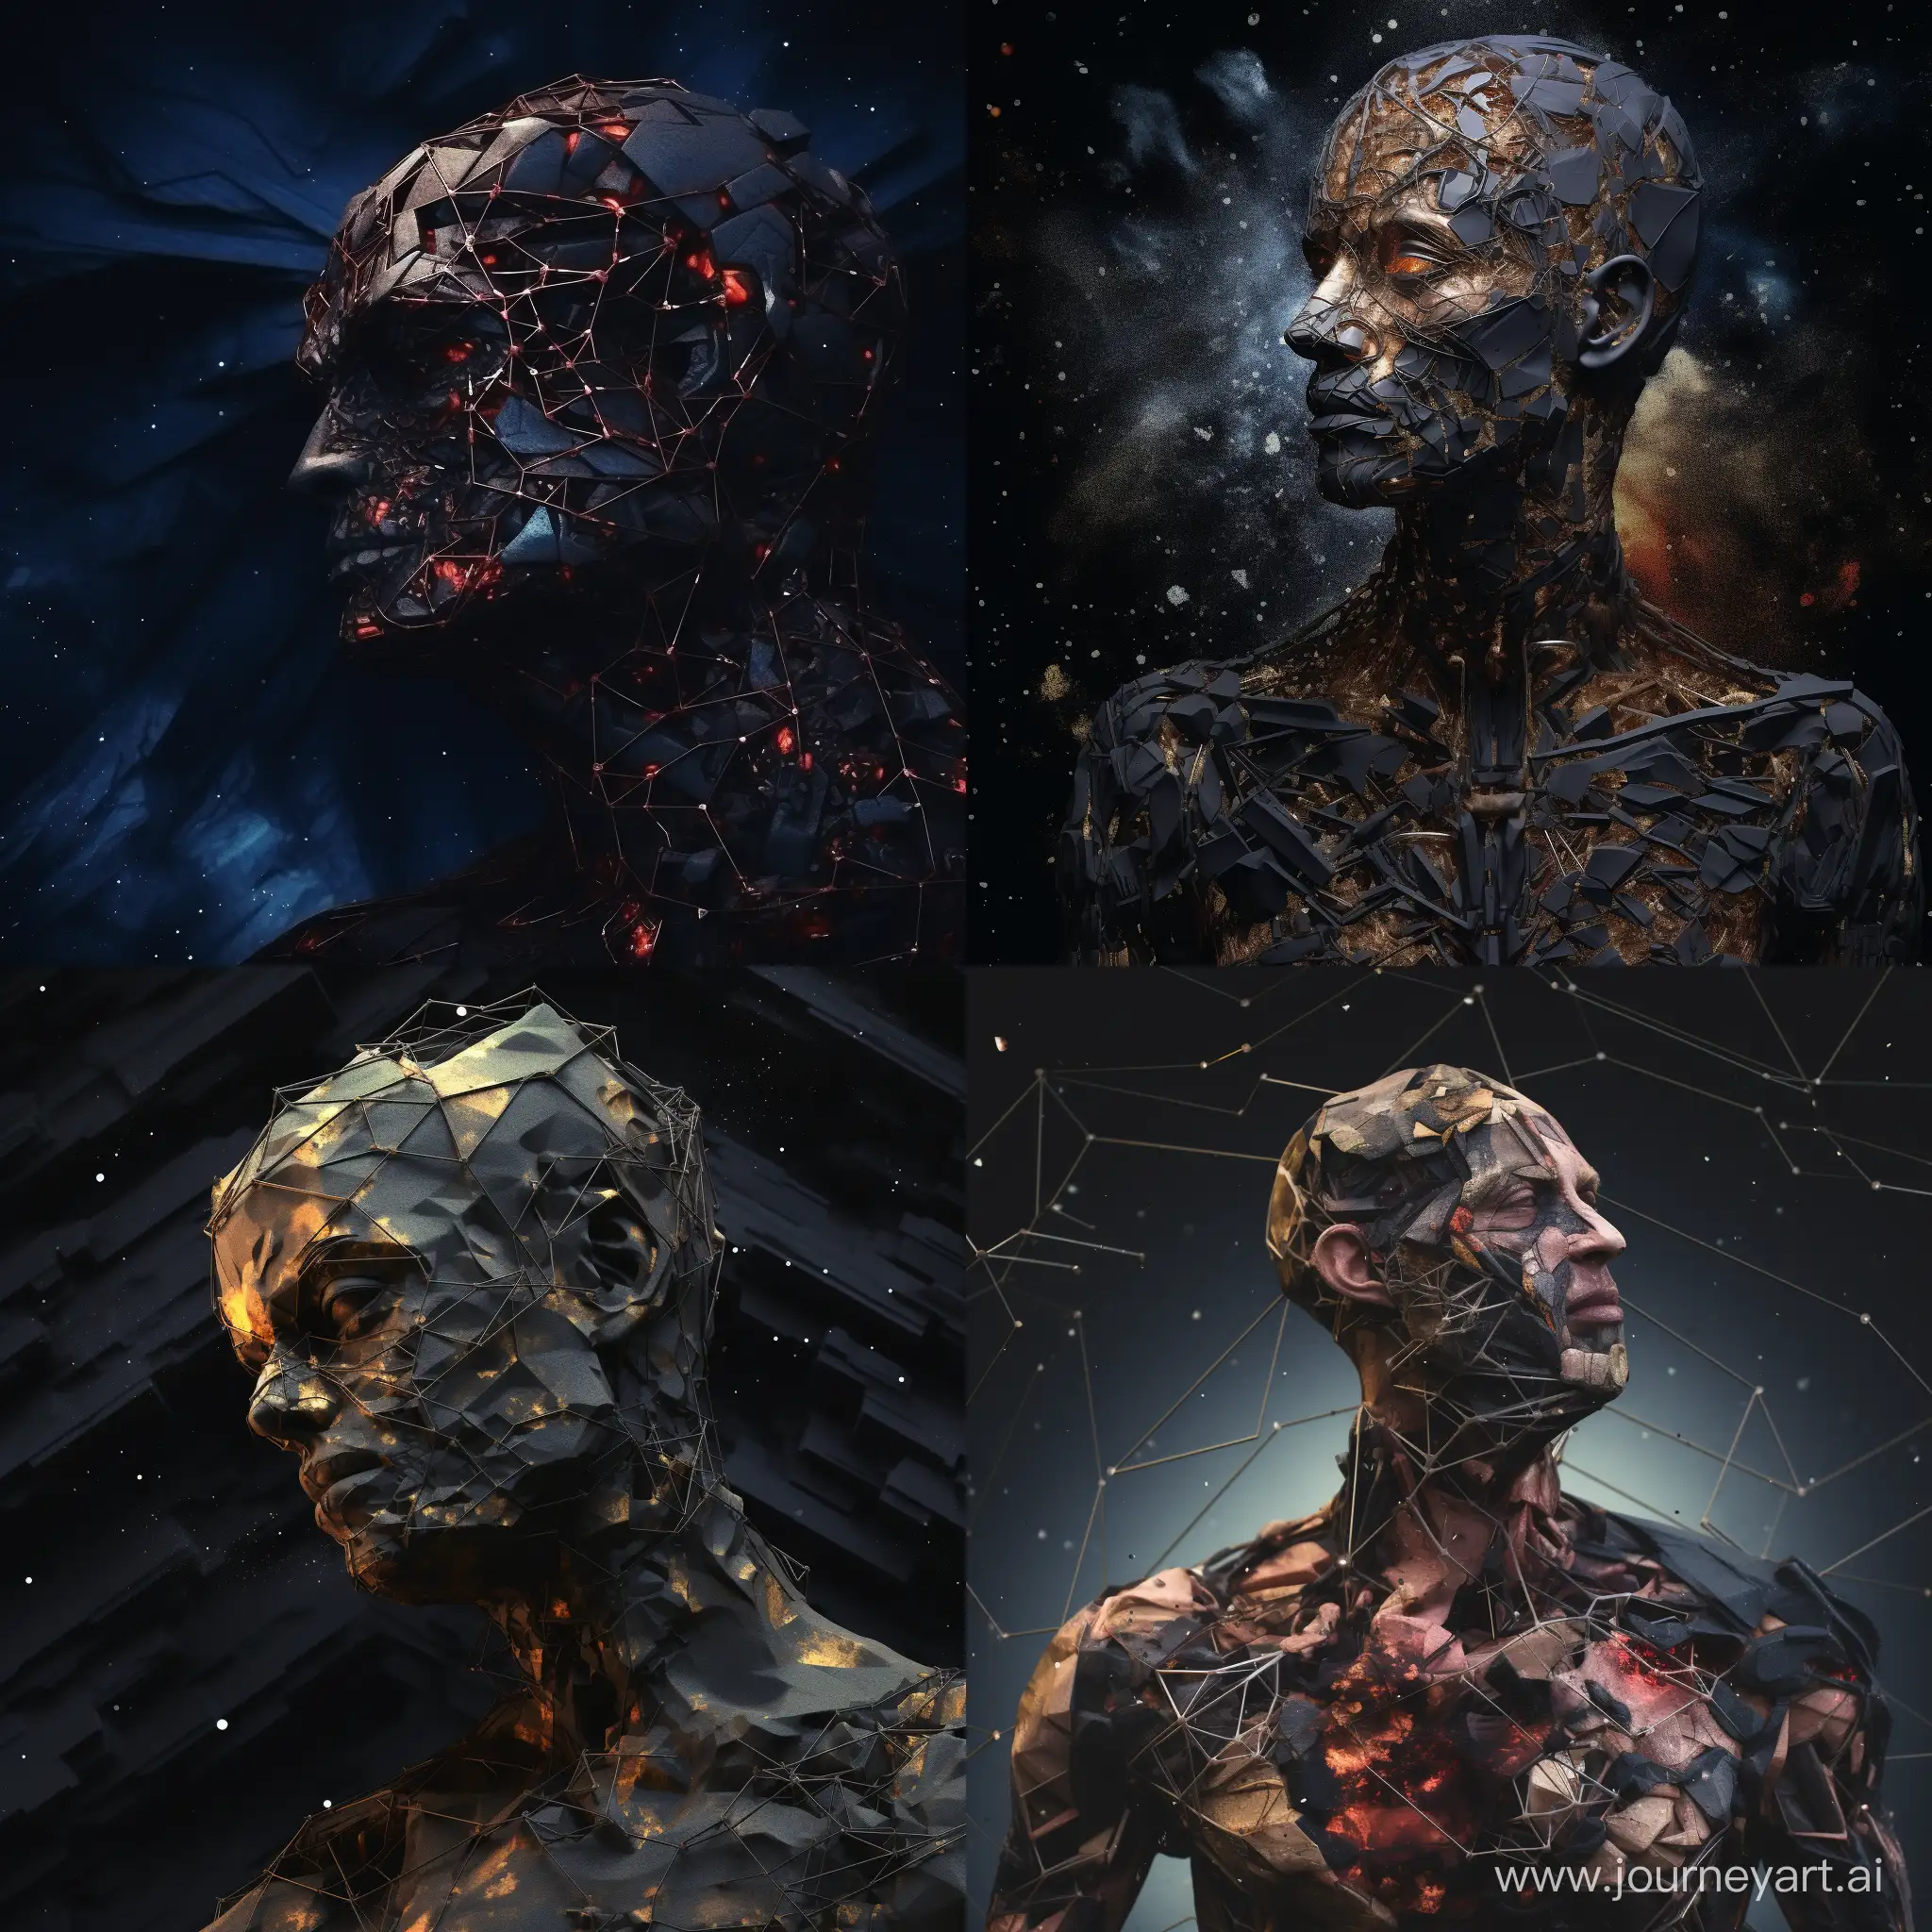 Fragmented-Human-Body-on-Dark-Abstract-Background